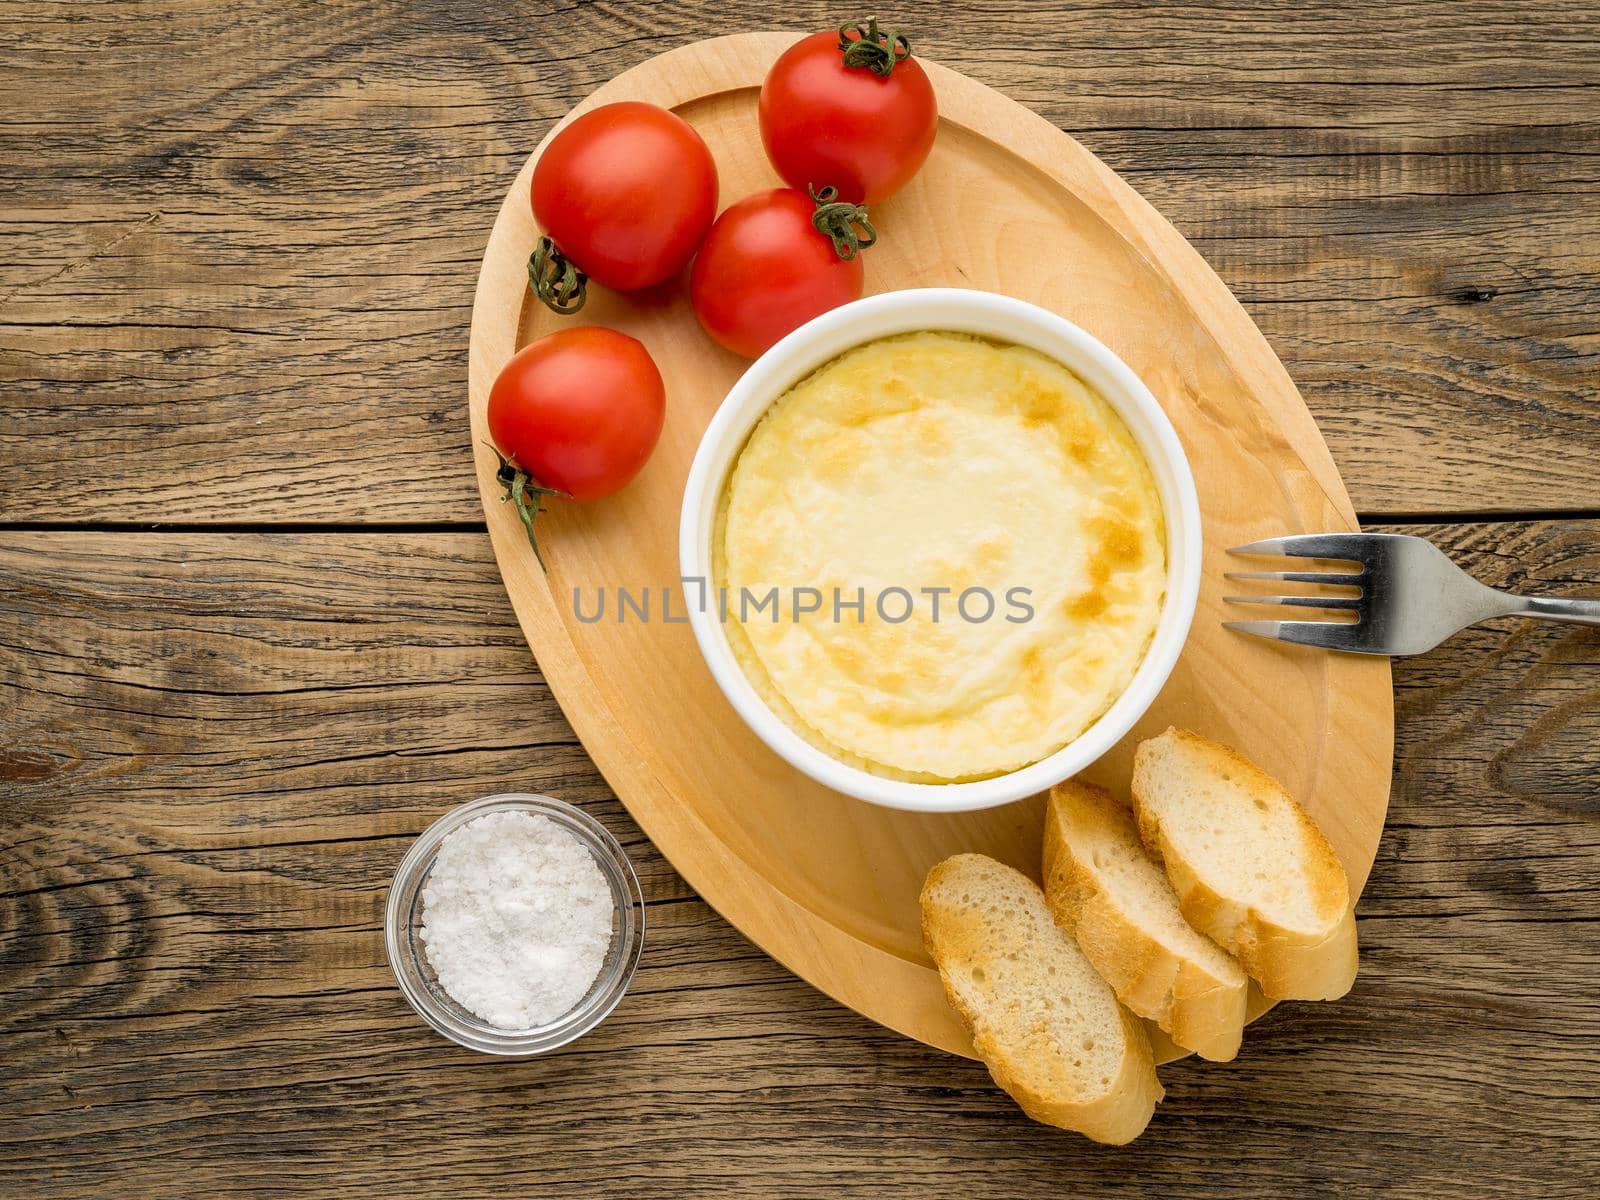 wood plate with oven-baked omelet of eggs and milk, with tomatoes and toast on brown rustic wooden table, top view